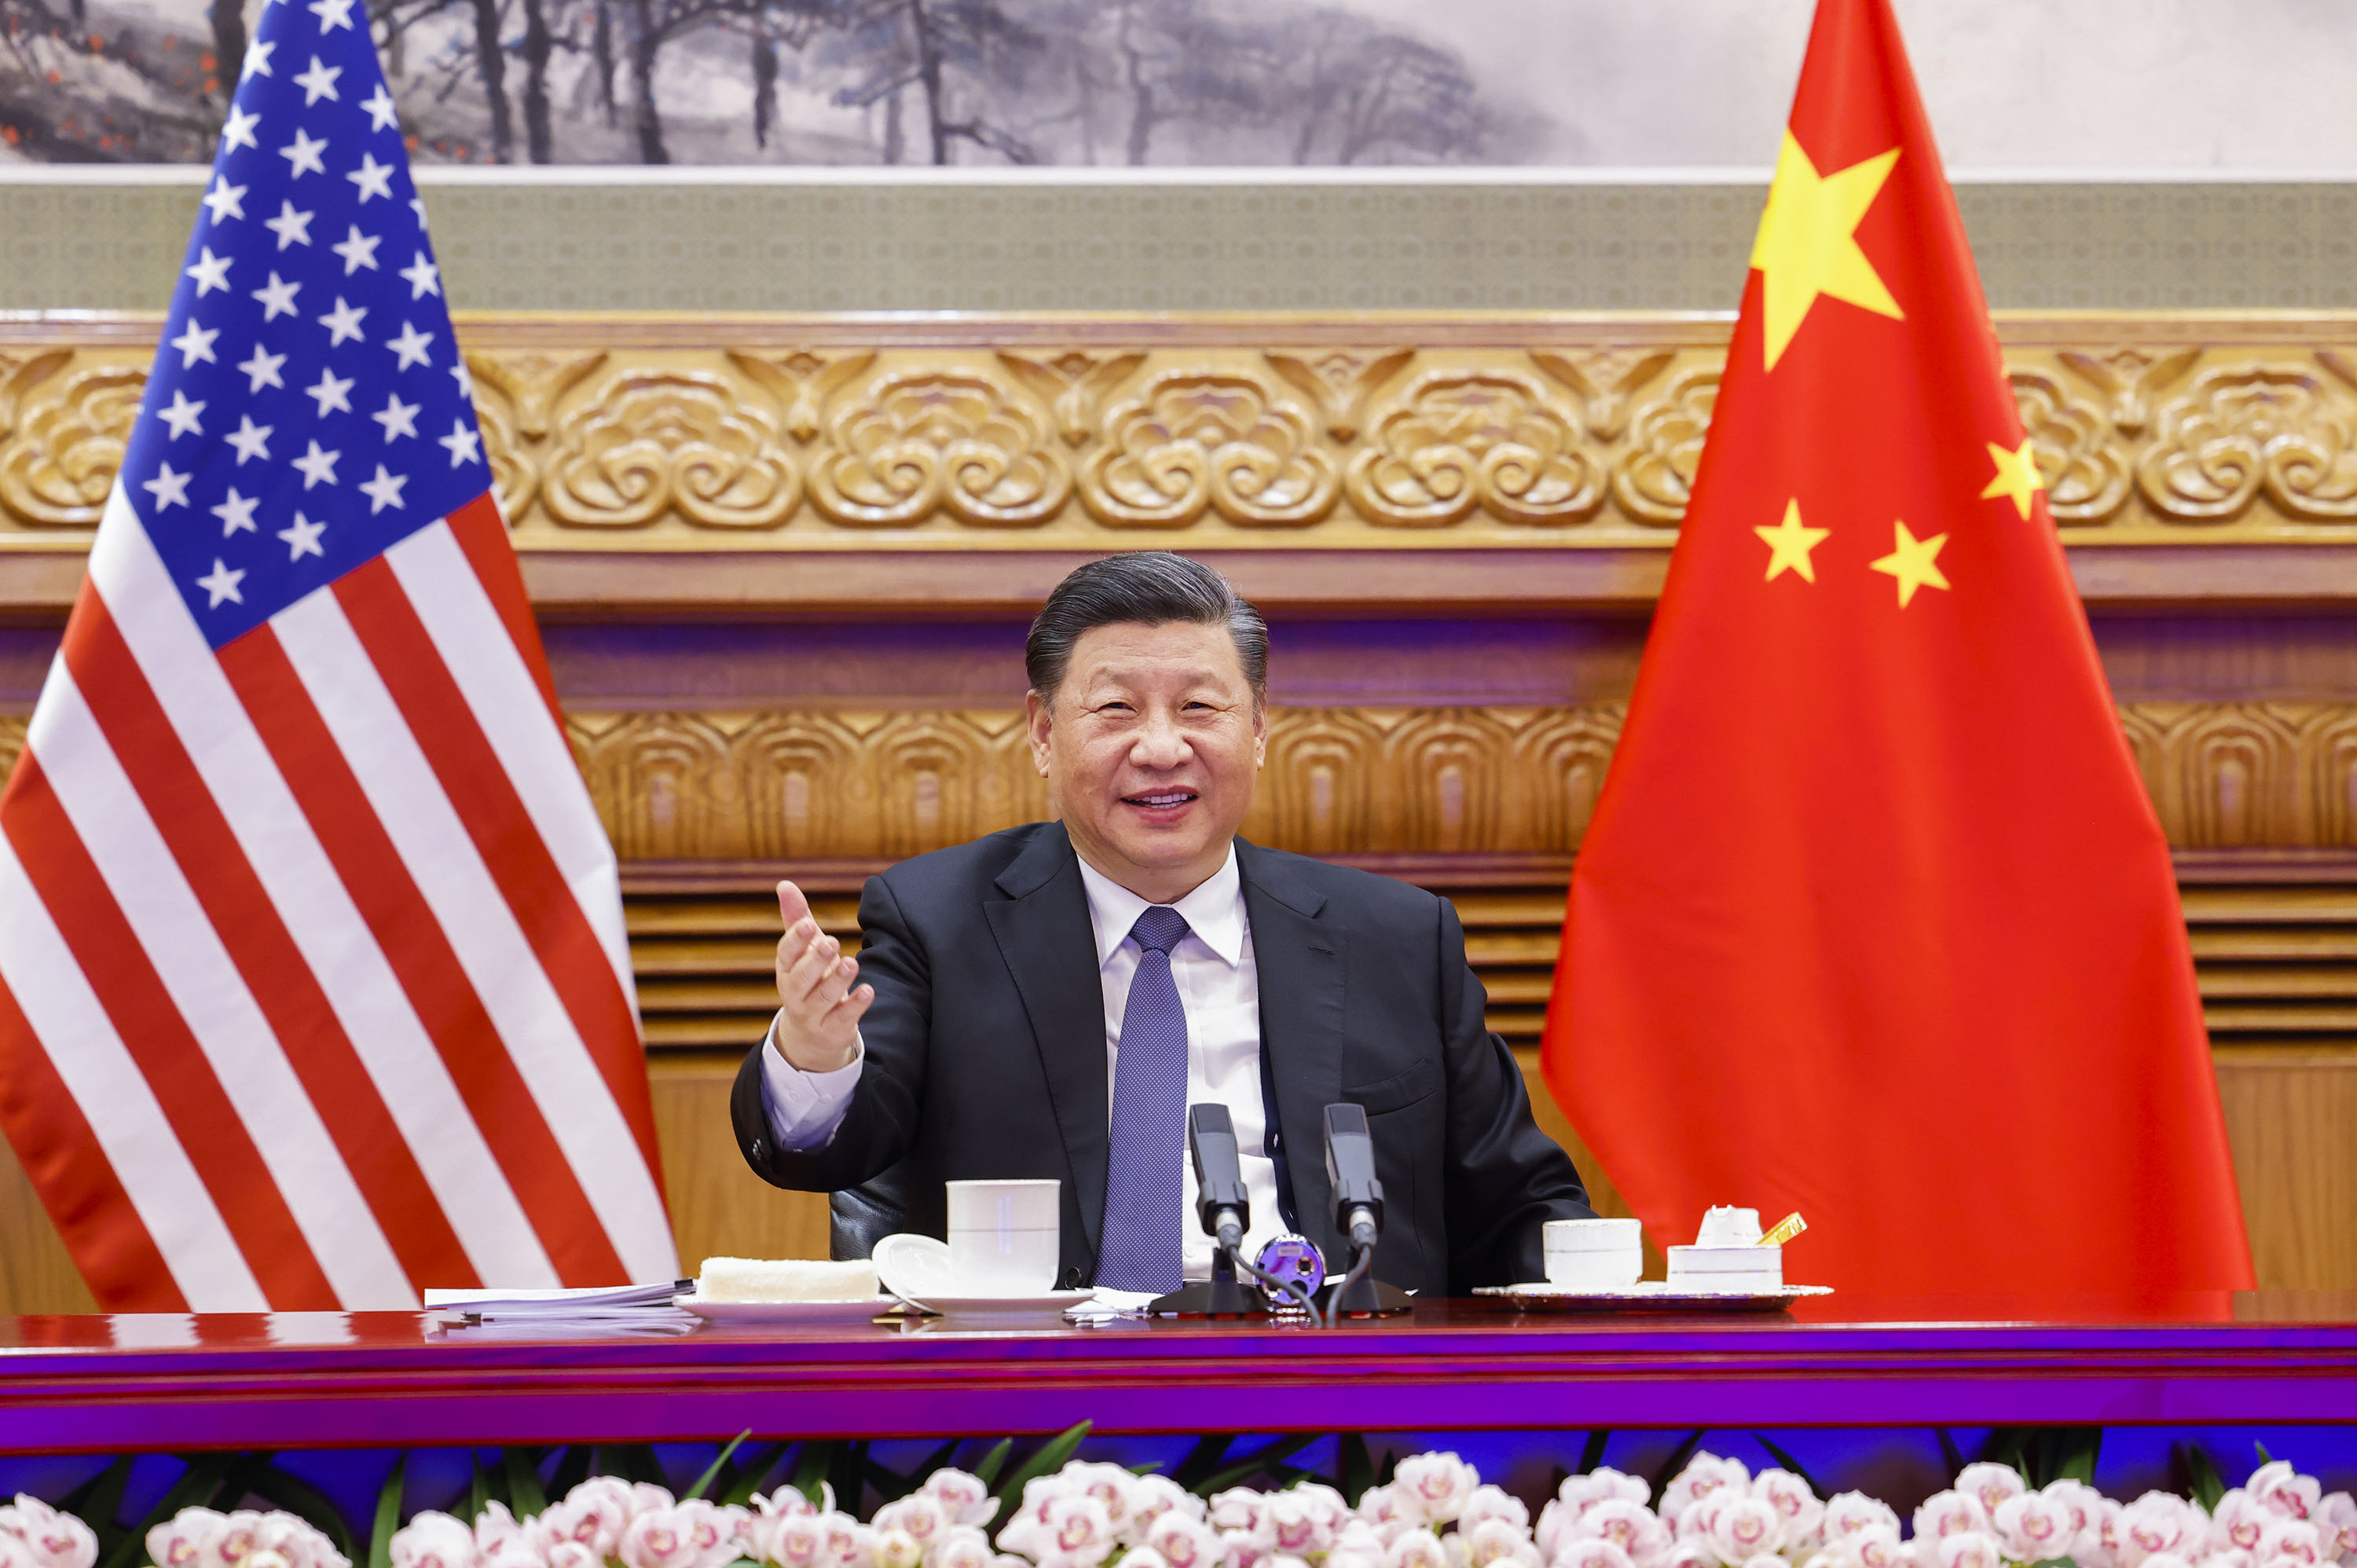 Climate change can become new highlight of China-US cooperation: Xi 